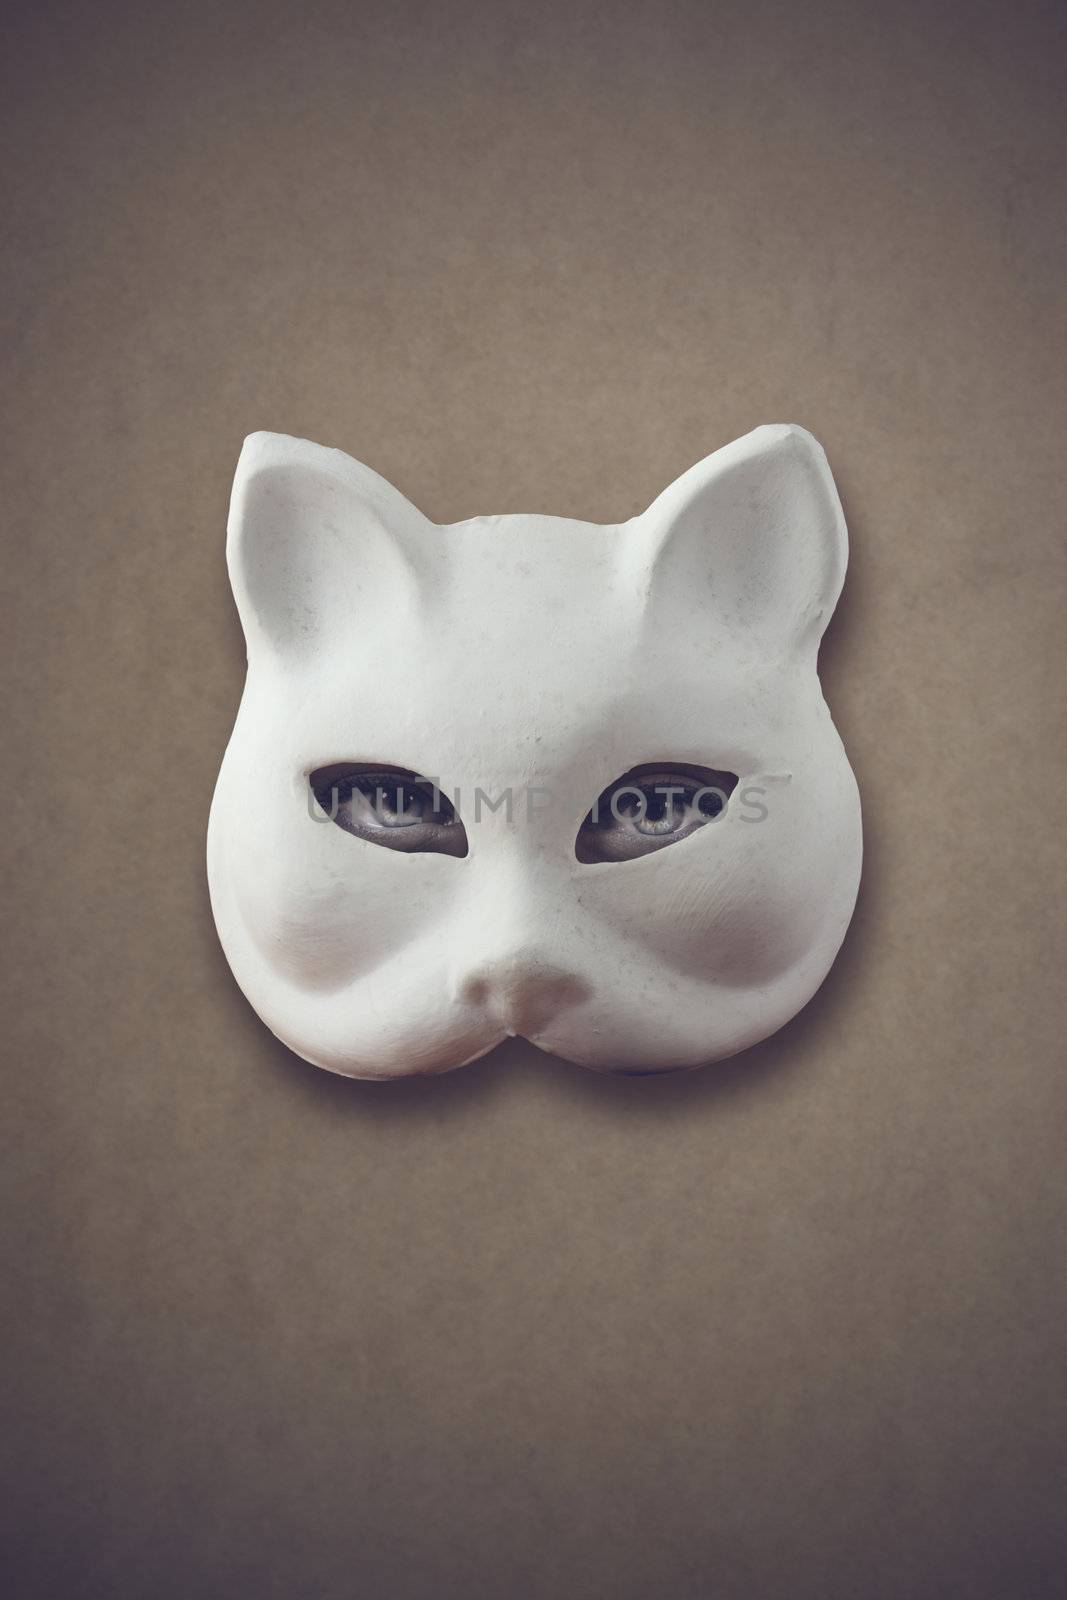 mysterious woman: woman's eyes with a cat mask